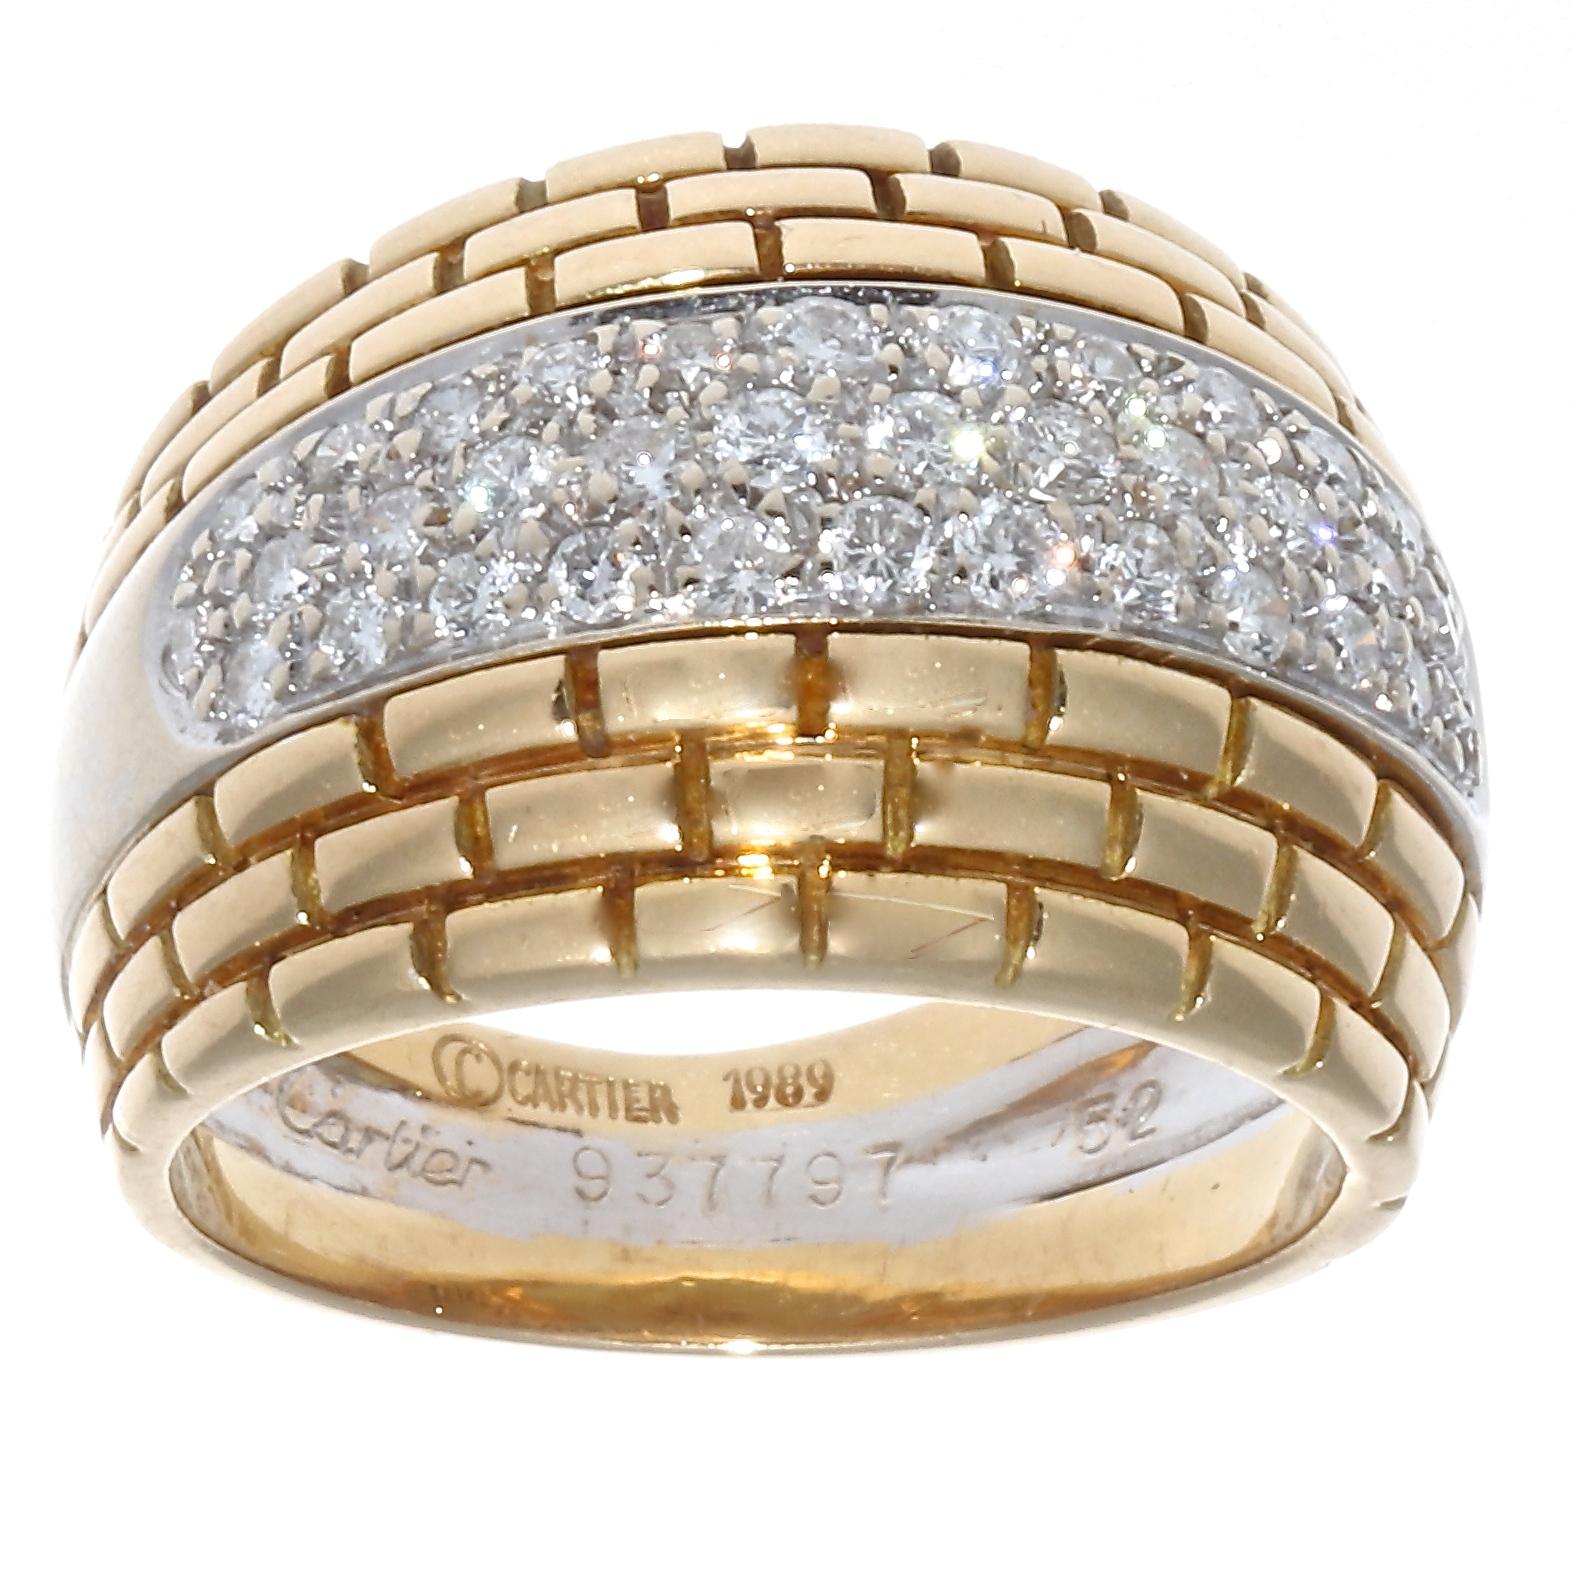 Modern Cartier Maillon Panther Diamond Gold Ring